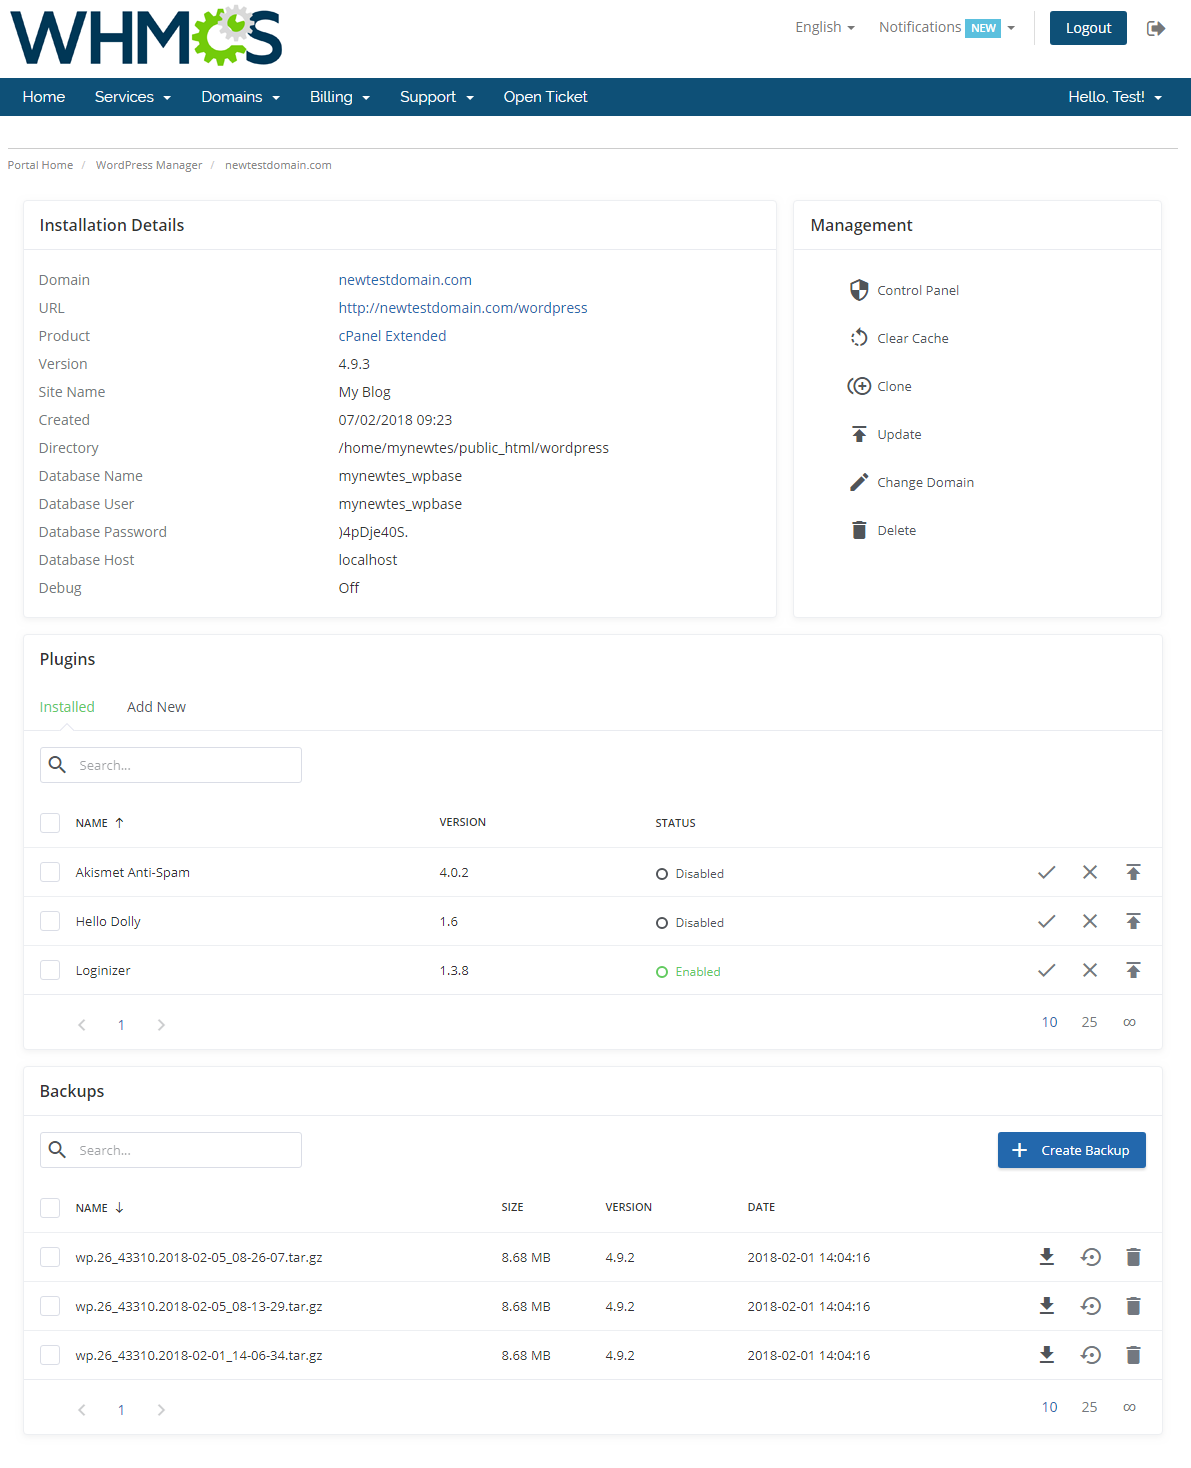 ModulesGarden WordPress Manager For WHMCS - Client Area